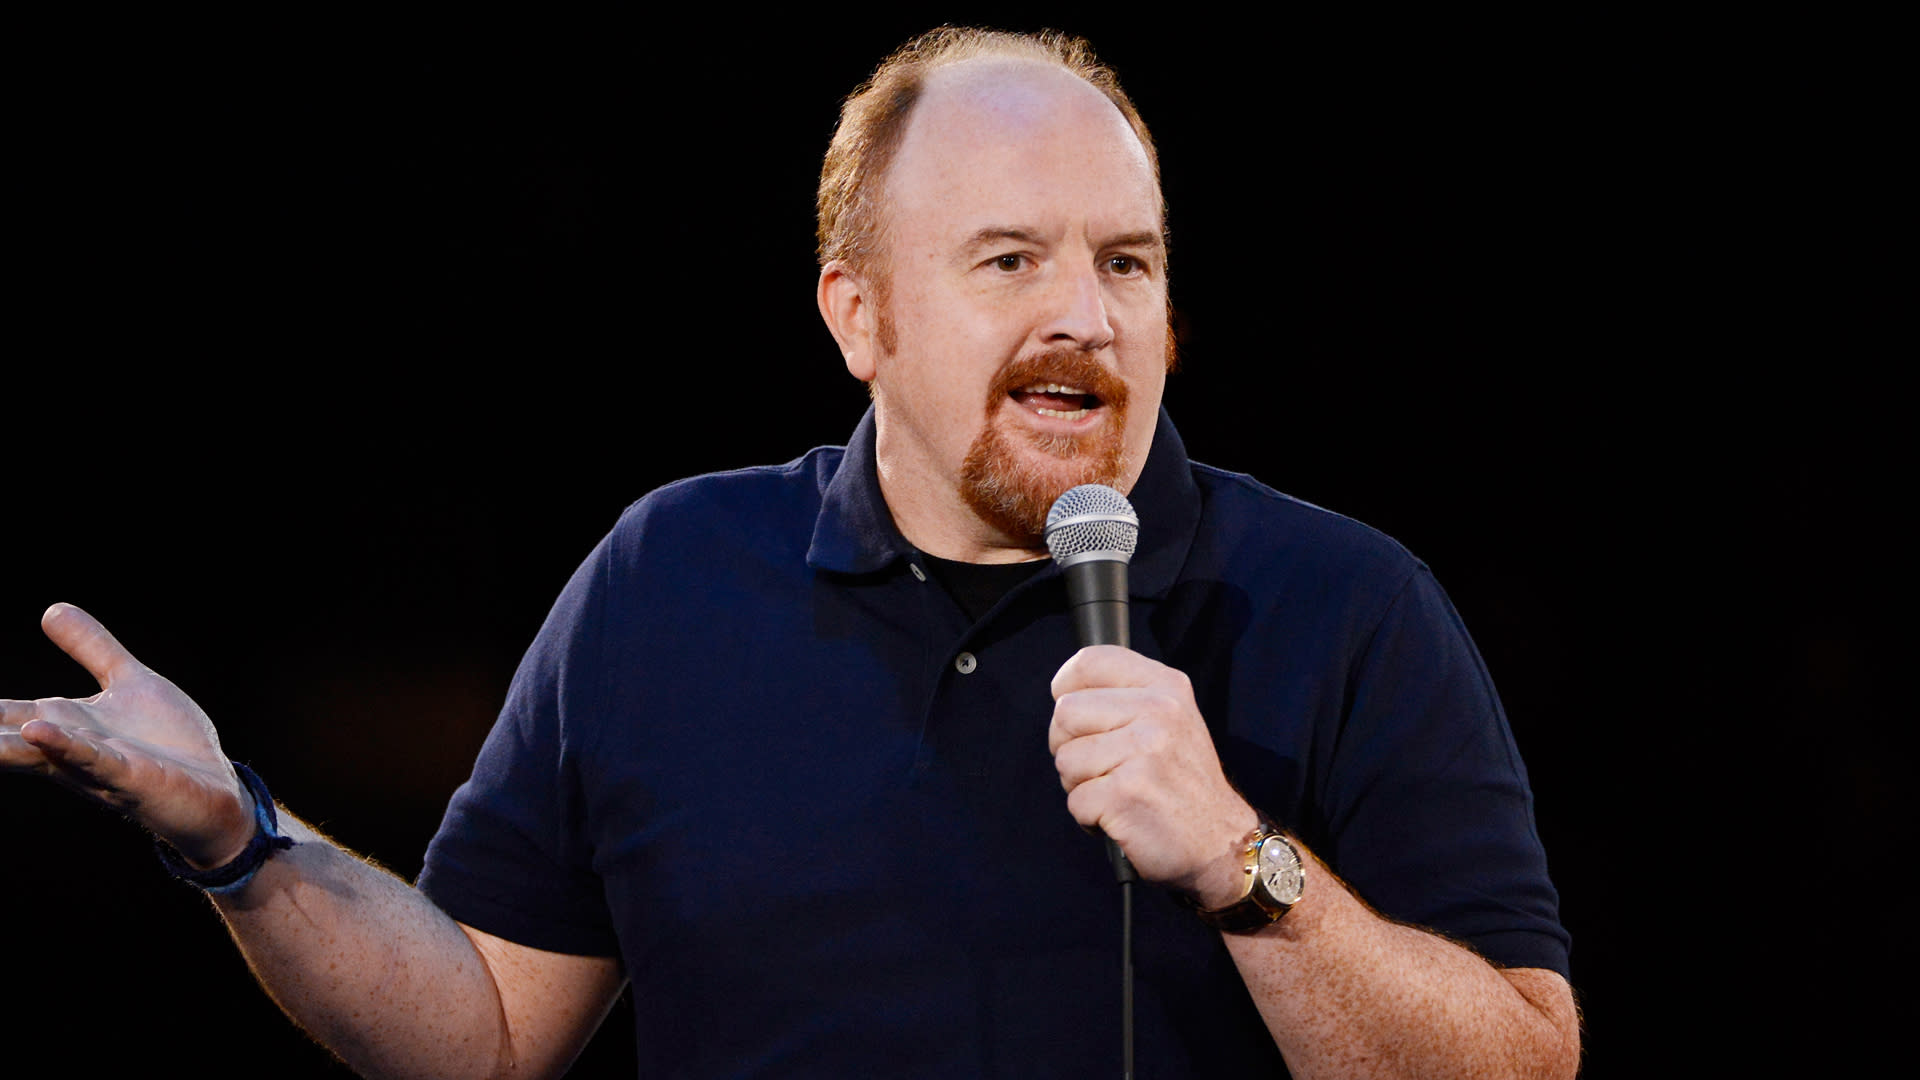 FX to Air Louis CK Comedy Special